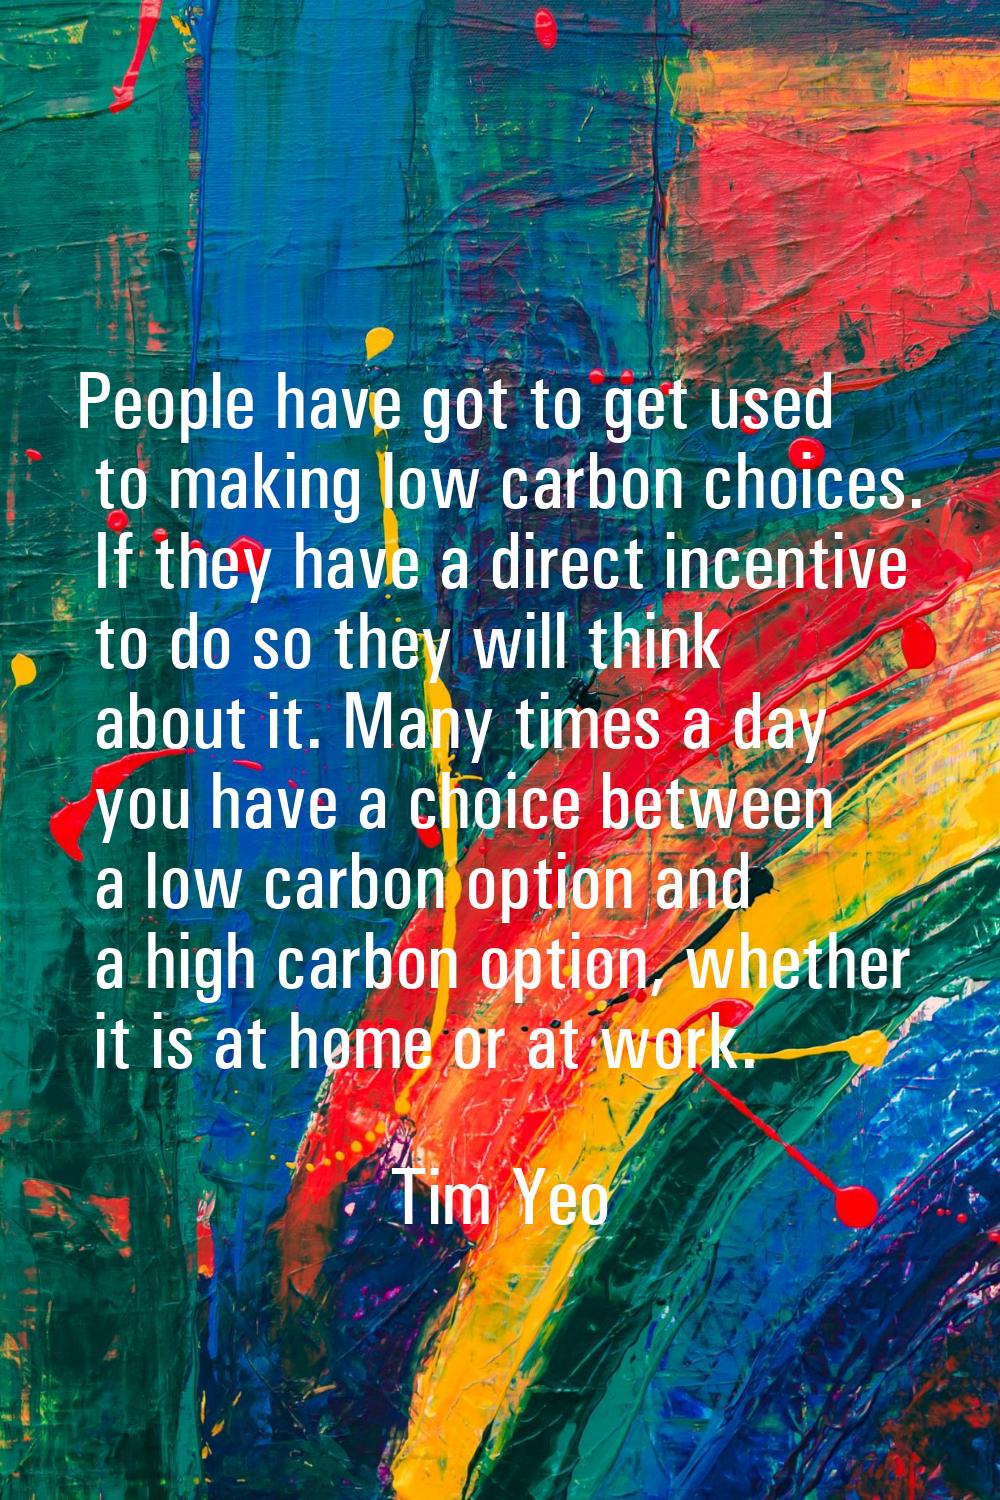 People have got to get used to making low carbon choices. If they have a direct incentive to do so 